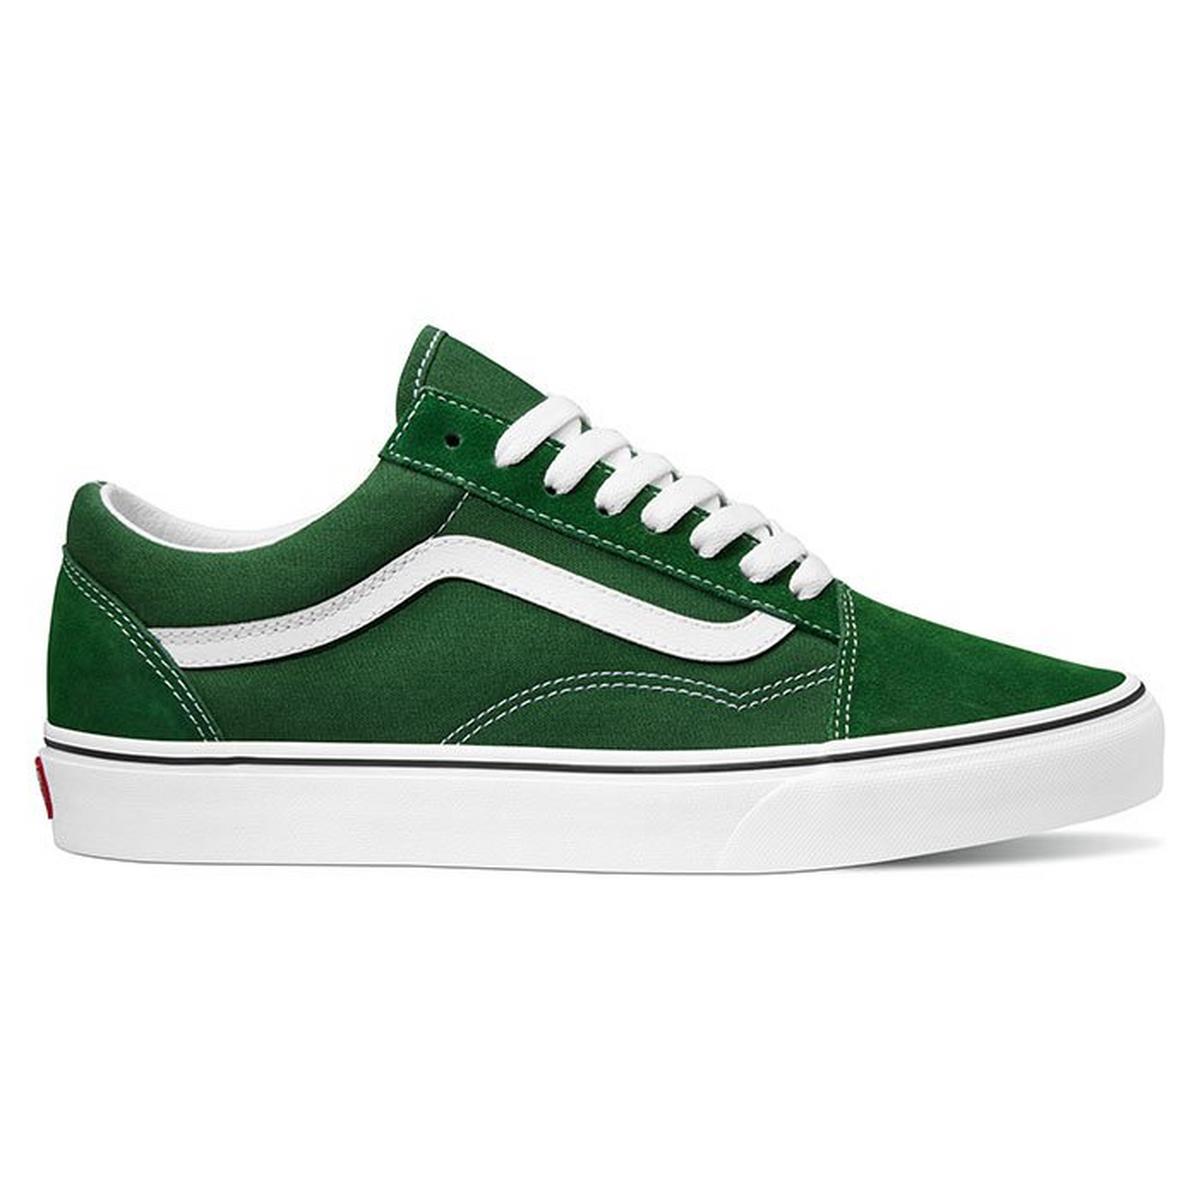 Chaussures Old Skool pour hommes